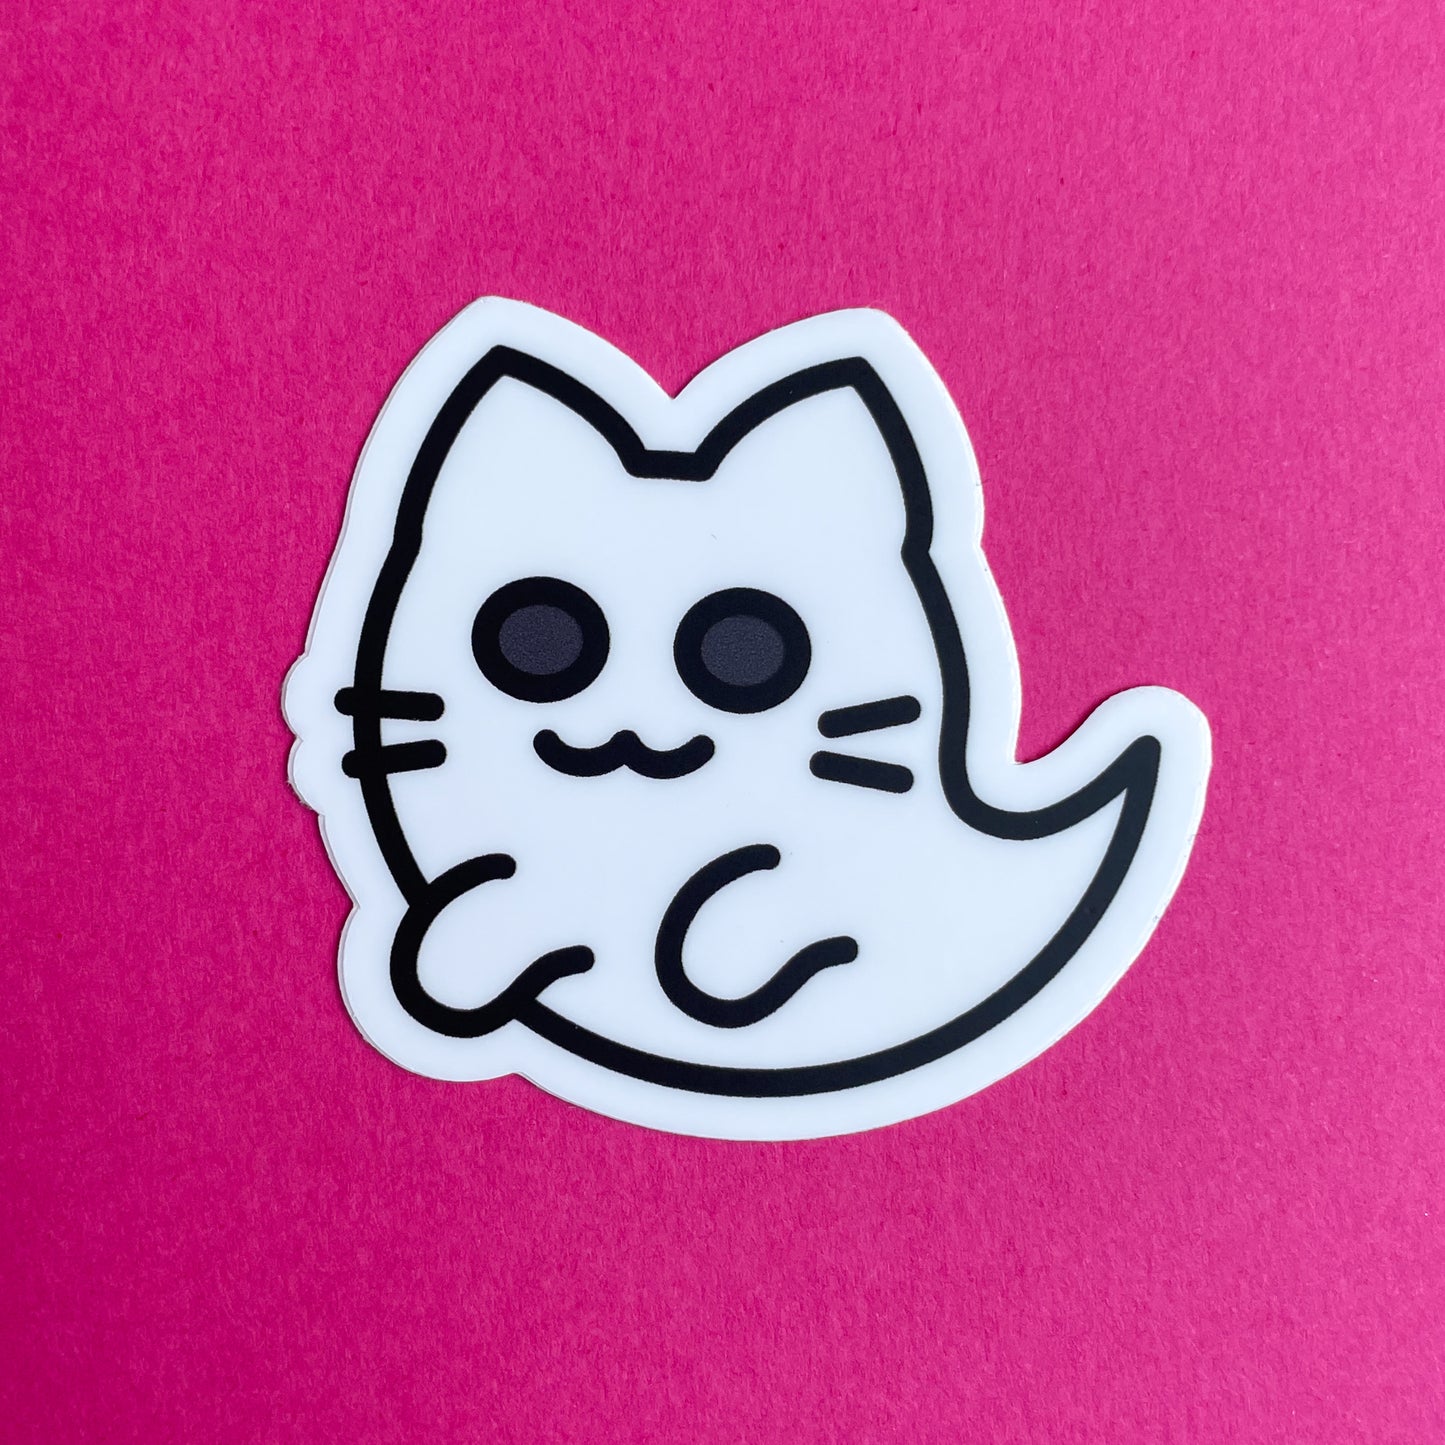 A sticker of a cute ghost cat on a pink background.